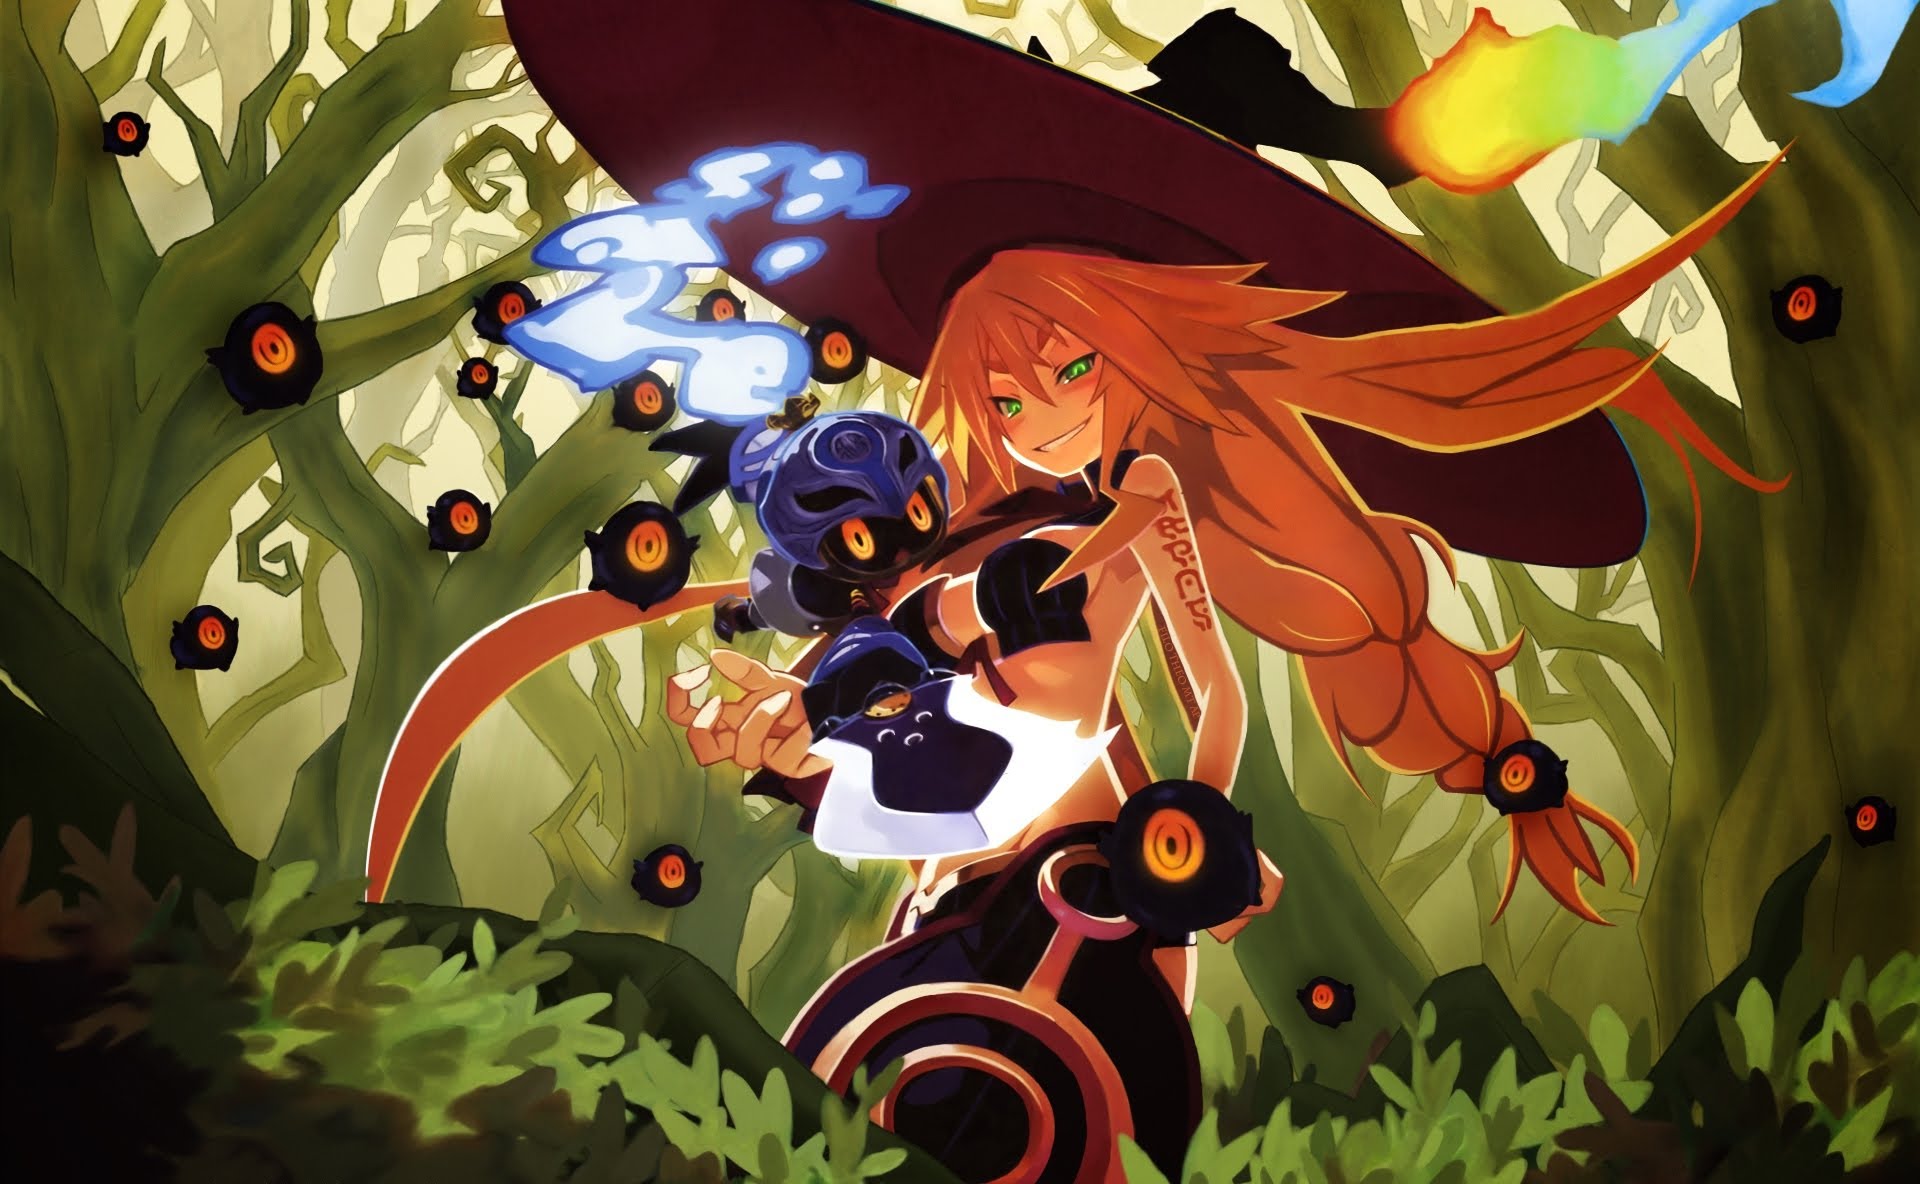 Annunciato The Witch and the Hundred Knight: Revival per PS4